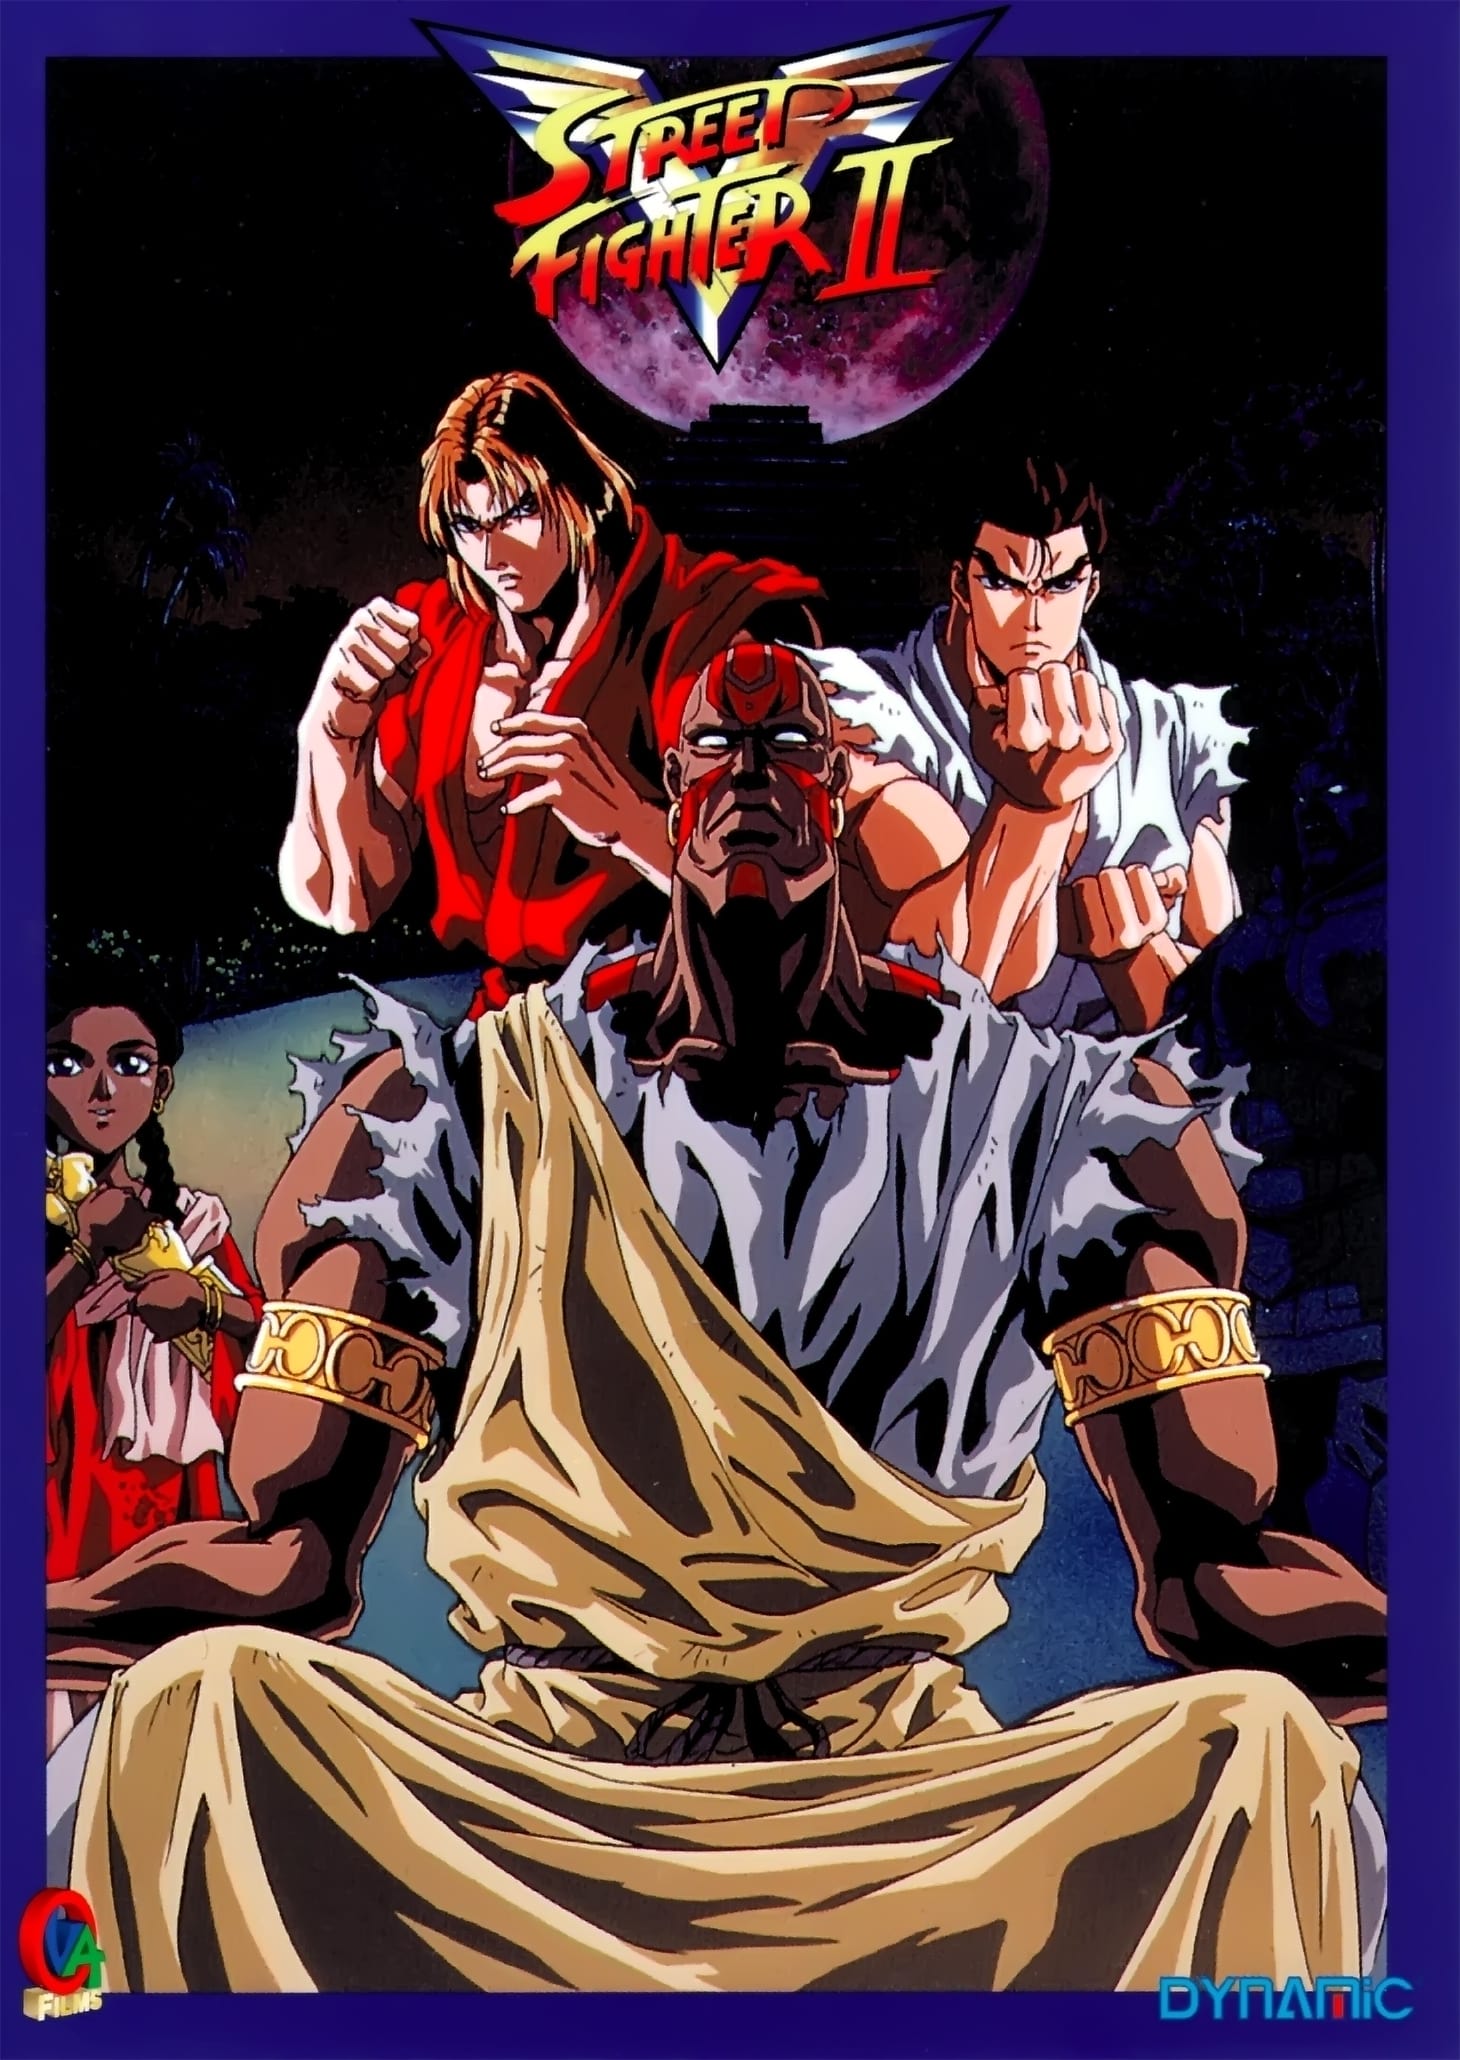 Street Fighter II: V (TV Series 1995-1995) - Posters — The Movie